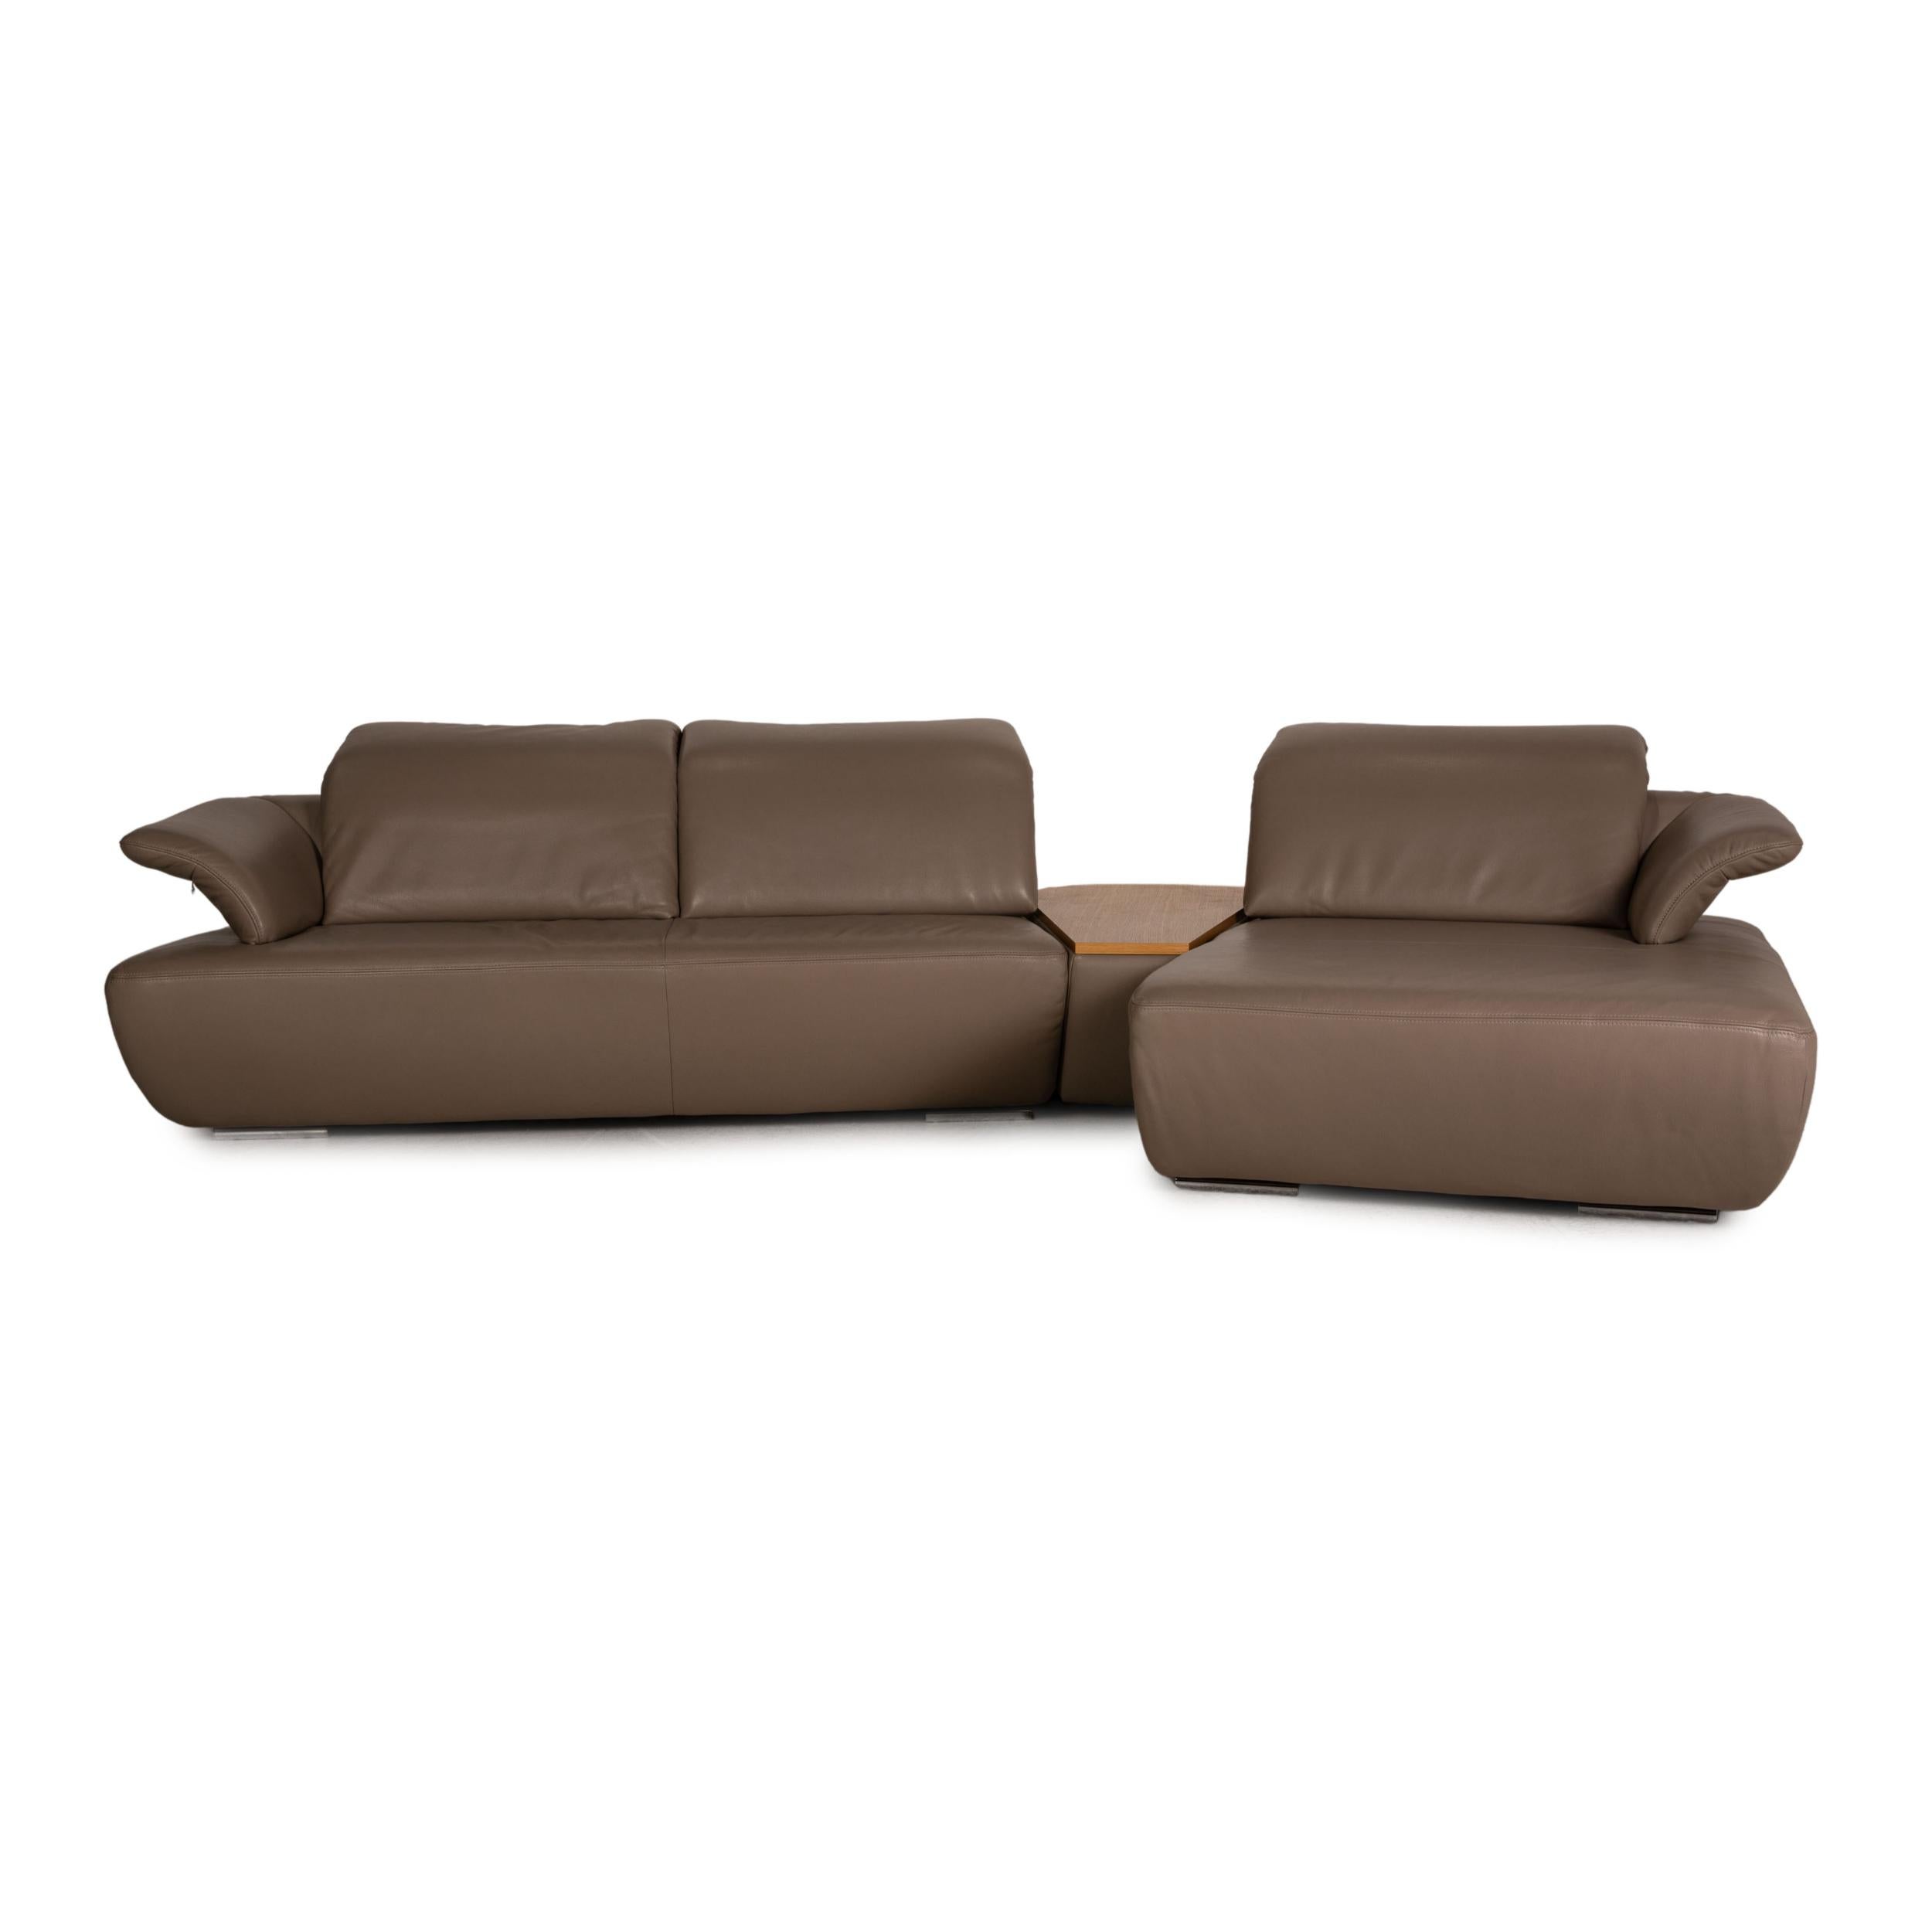 Contemporary Koinor Avanti Leather Sofa Beige Corner Sofa Couch Function For Sale